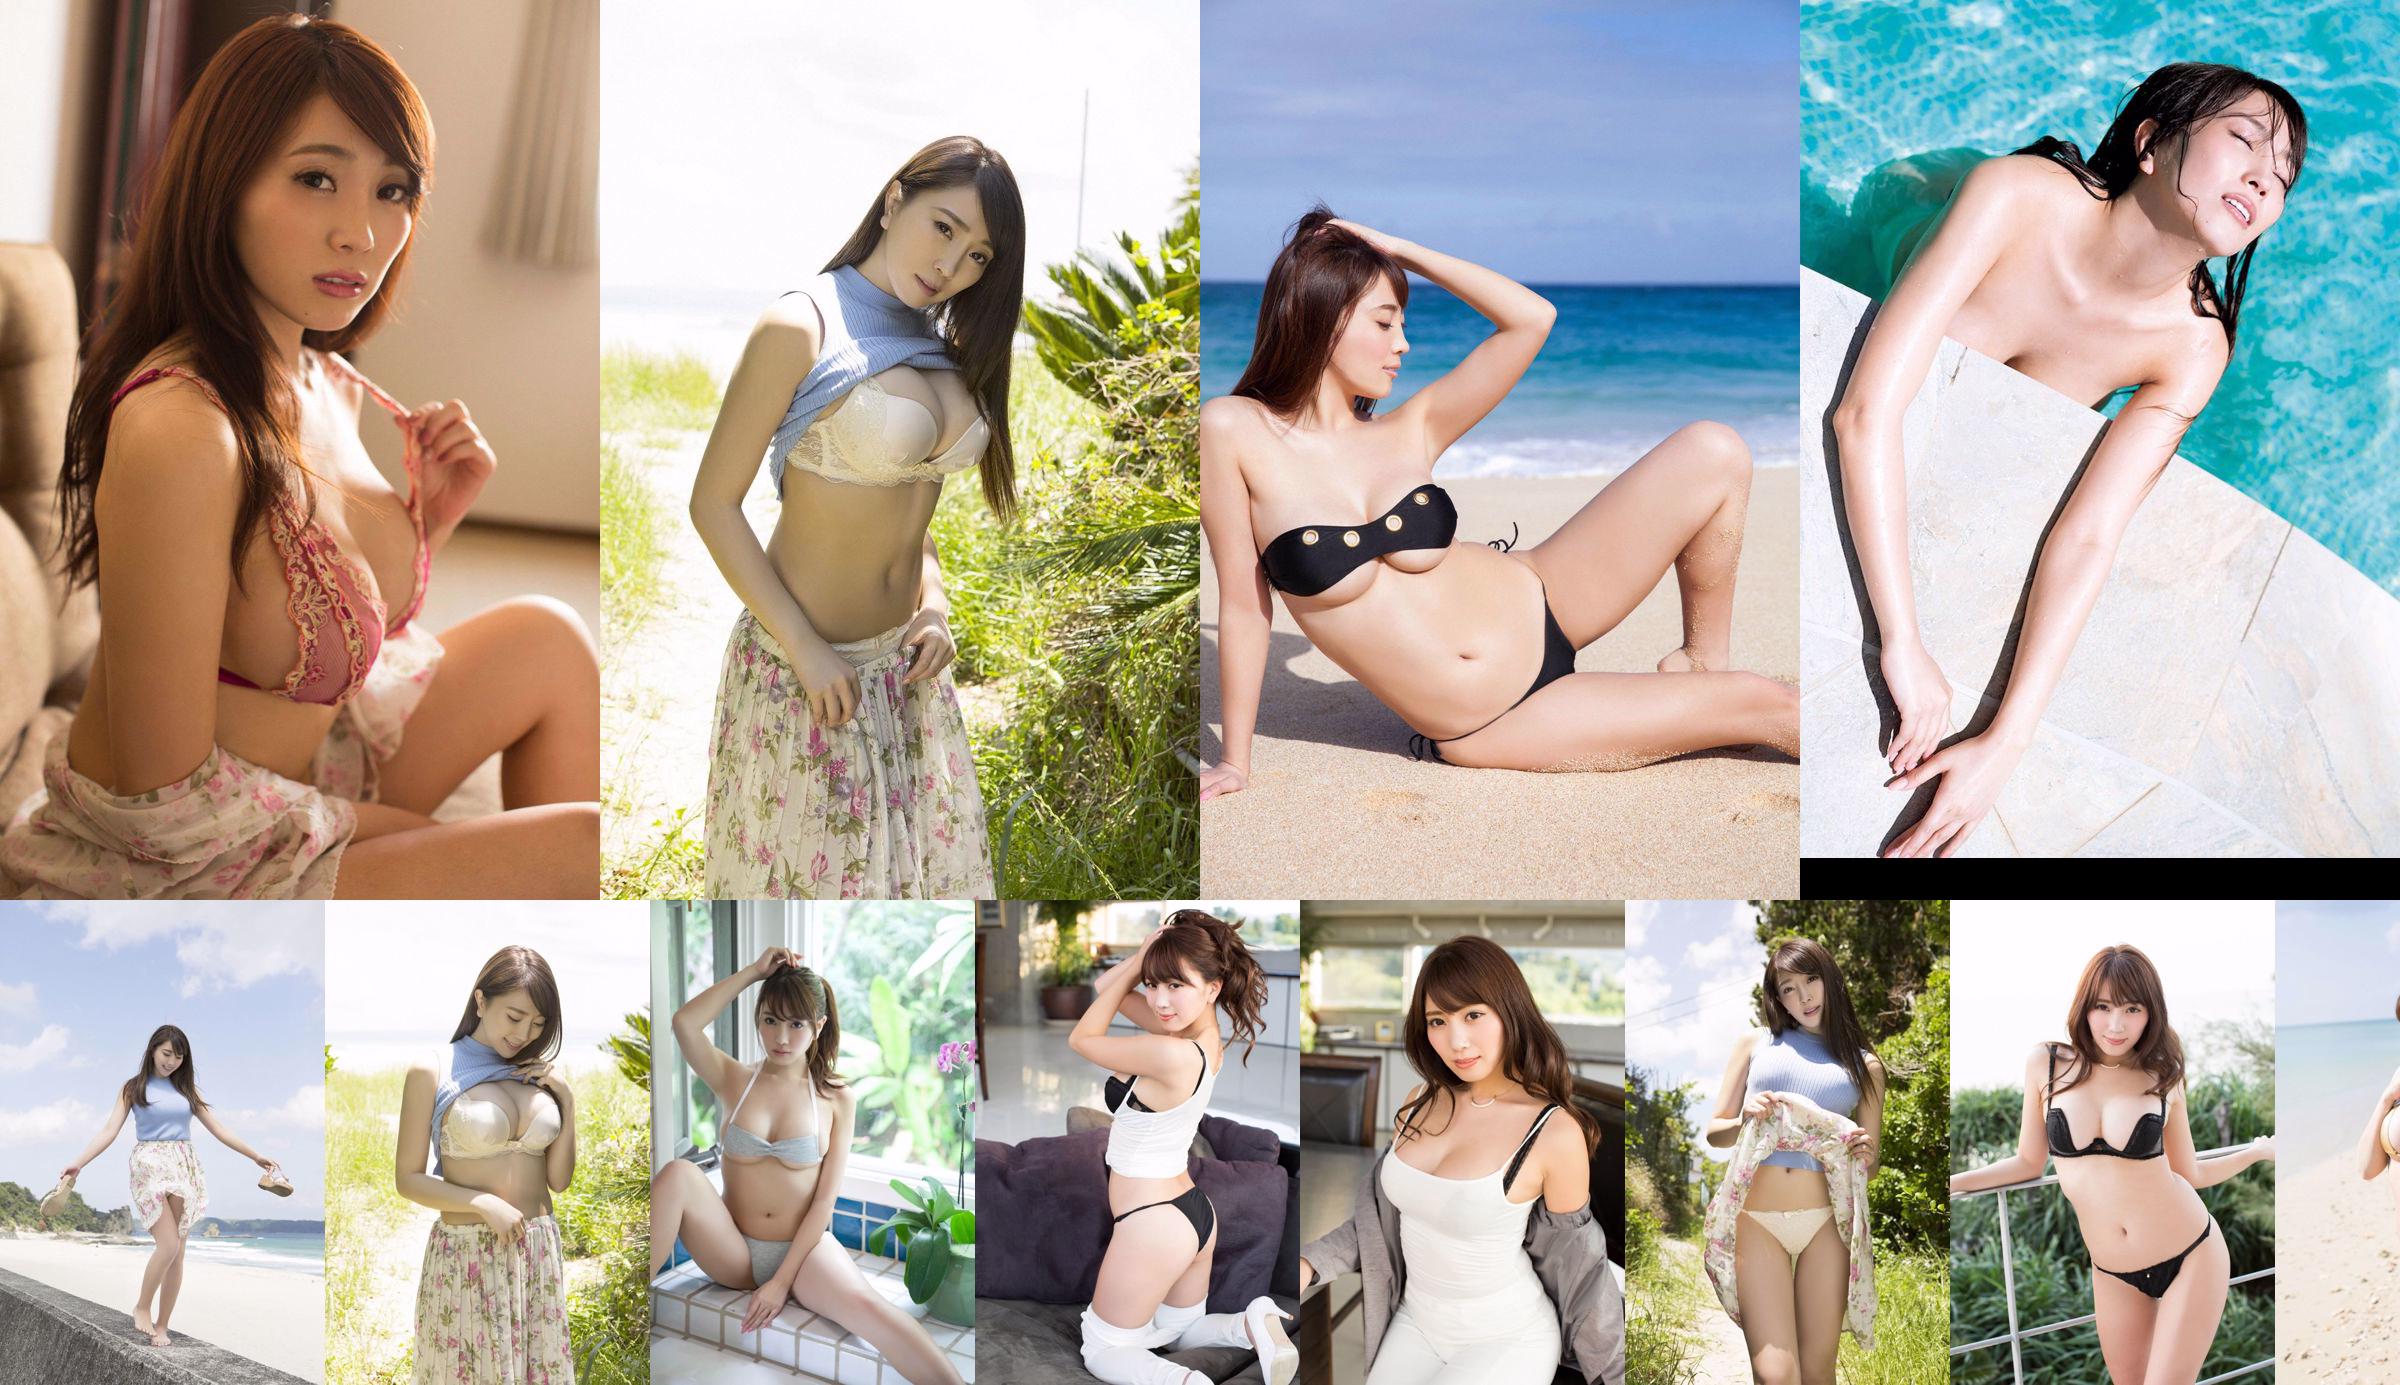 Yume Takeda Yume Takeda / Yume Takeda [Graphis] Gravure First off daughter No.4822e8 Page 4